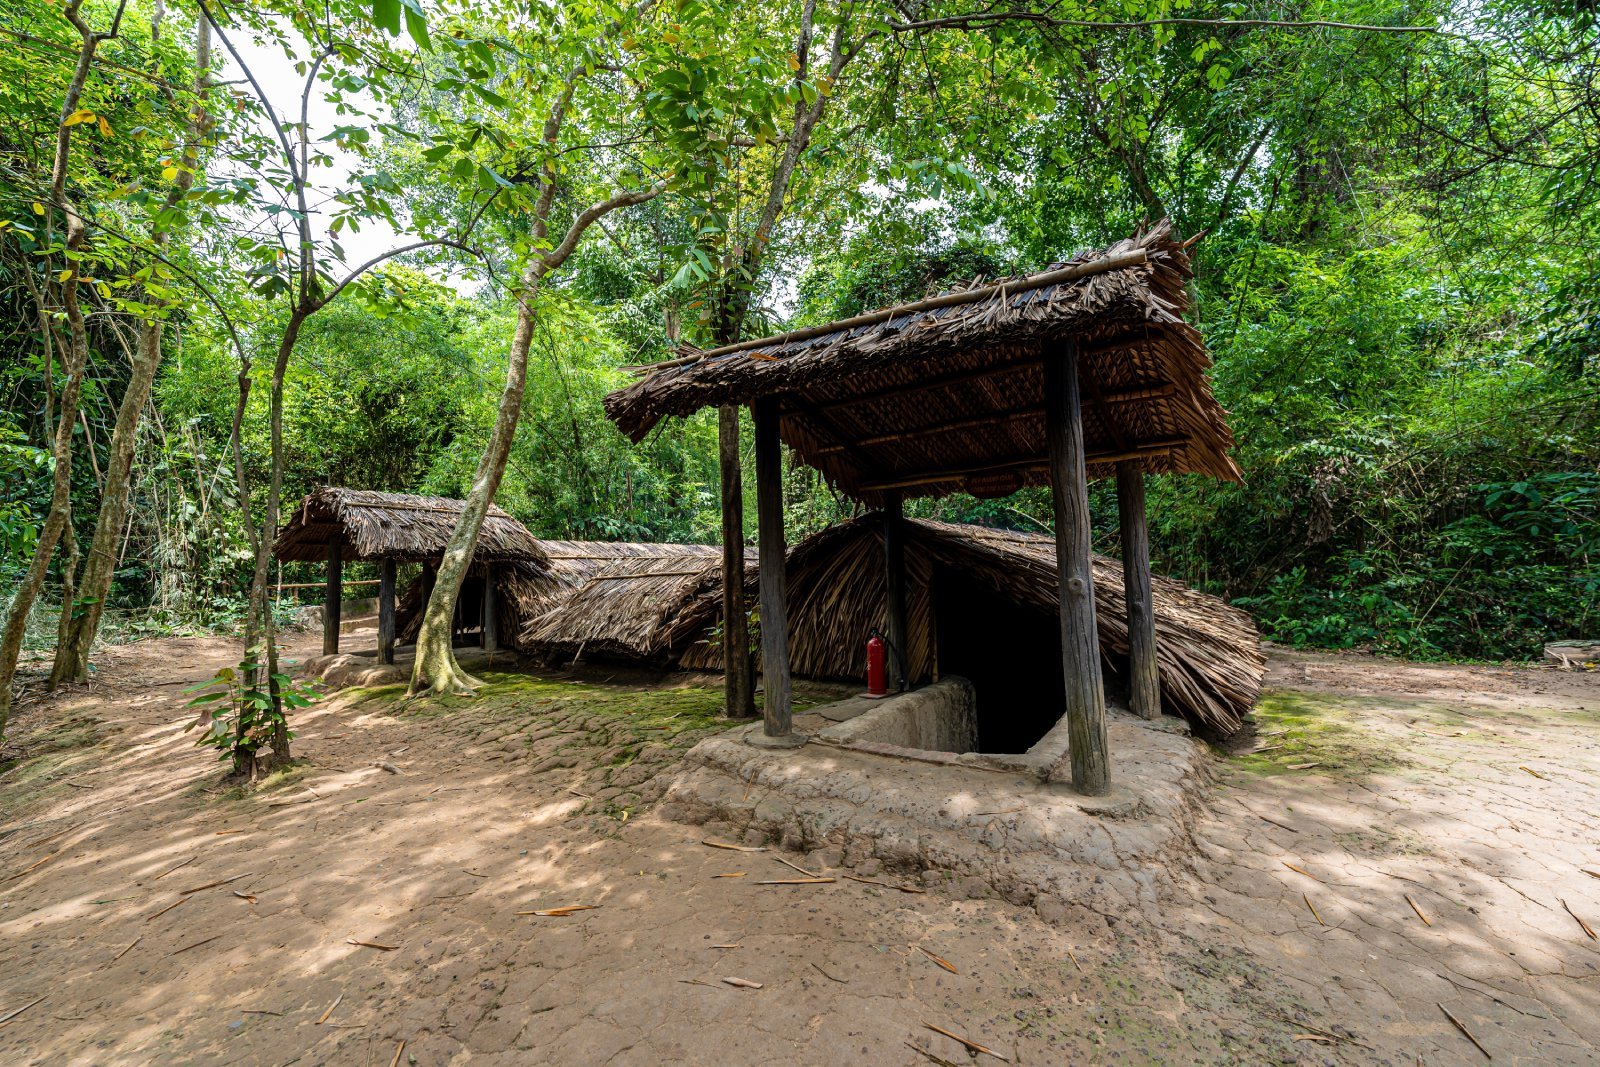 <p class="wp-caption-text">Image Credit: Shutterstock / CravenA</p>  <p><span>The Cu Chi Tunnels, a network of underground passageways used by the Viet Cong, provide a stark reminder of the ingenuity and determination of the Vietnamese forces. Trekking tours led by veterans offer an authentic account of the tunnels’ significance and use during the war. Visitors have the opportunity to explore sections of the tunnels, learning about the living conditions, booby traps, and survival strategies employed by the soldiers. The experience is both educational and emotional, bridging past and present as veterans recount their experiences and the impact of the war on Vietnam’s landscape and people.</span></p>